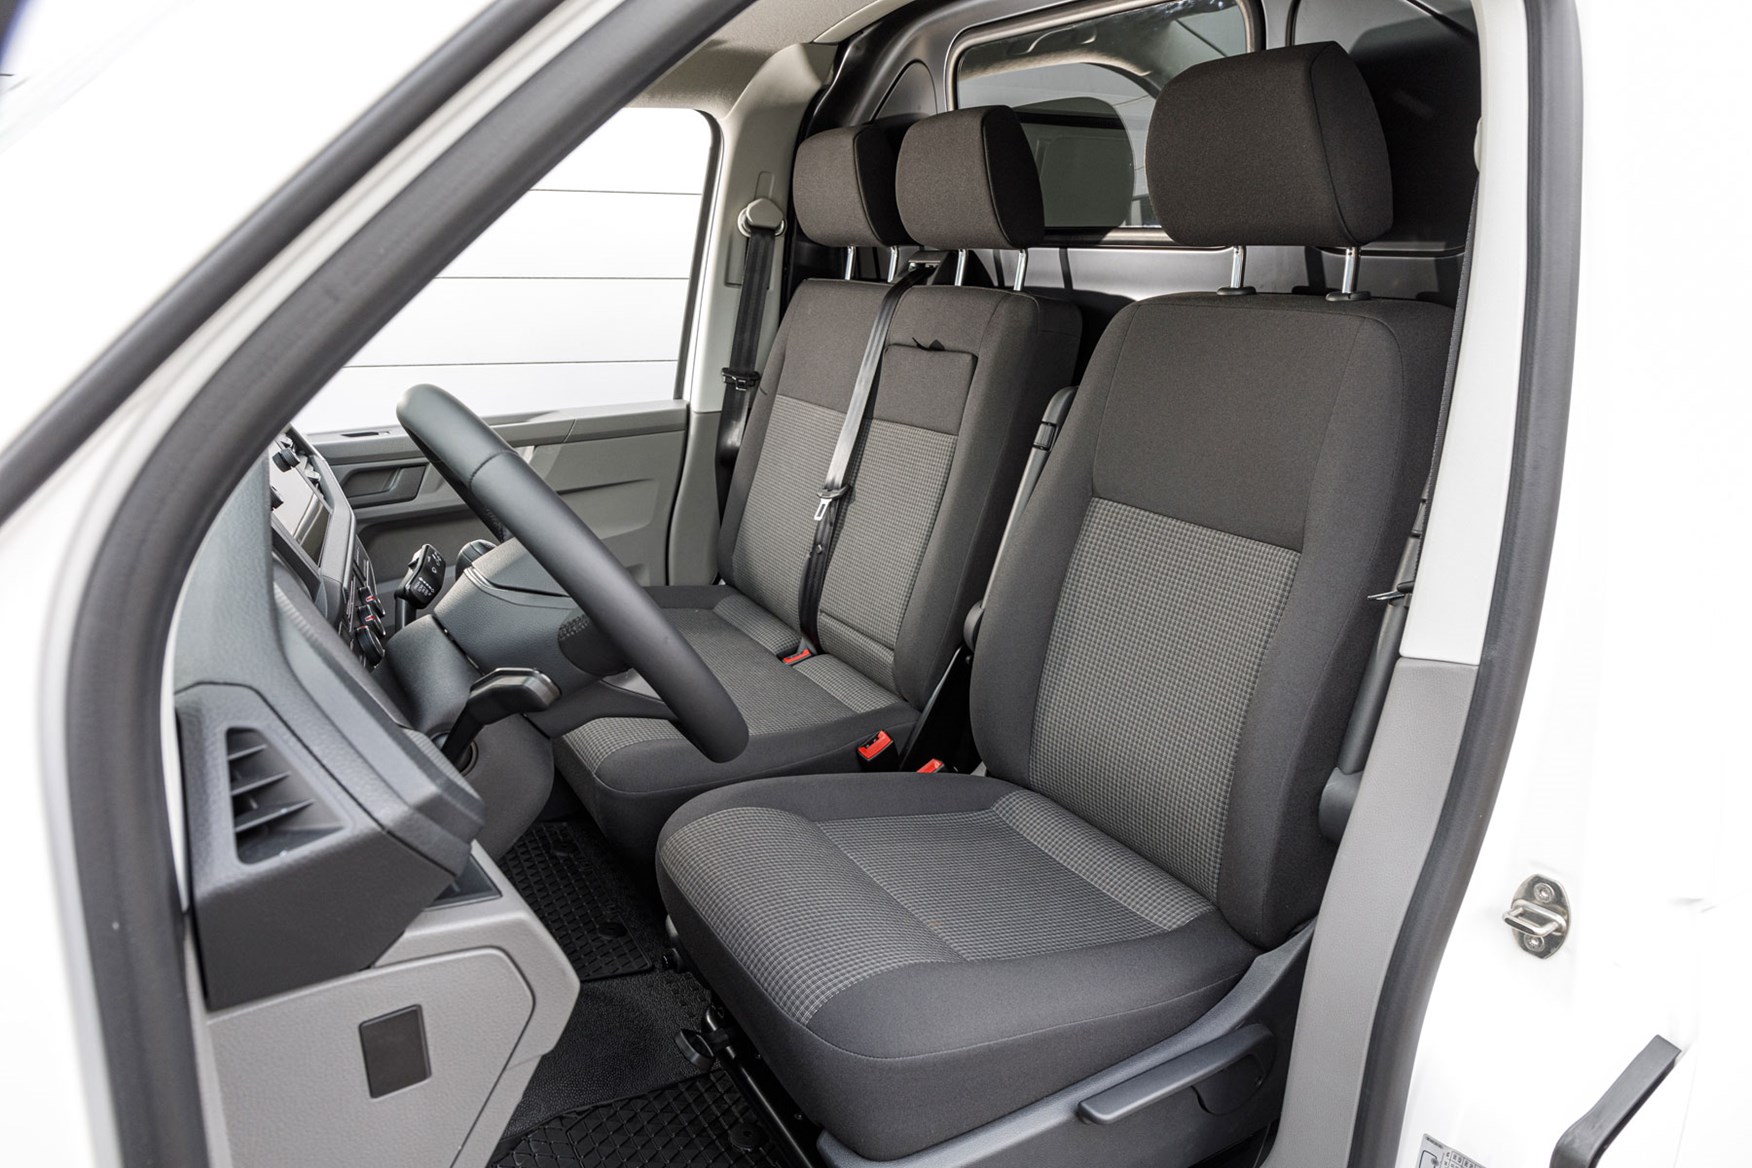 VW Transporter review - T6.1 2019 facelift, cab interior showing seats